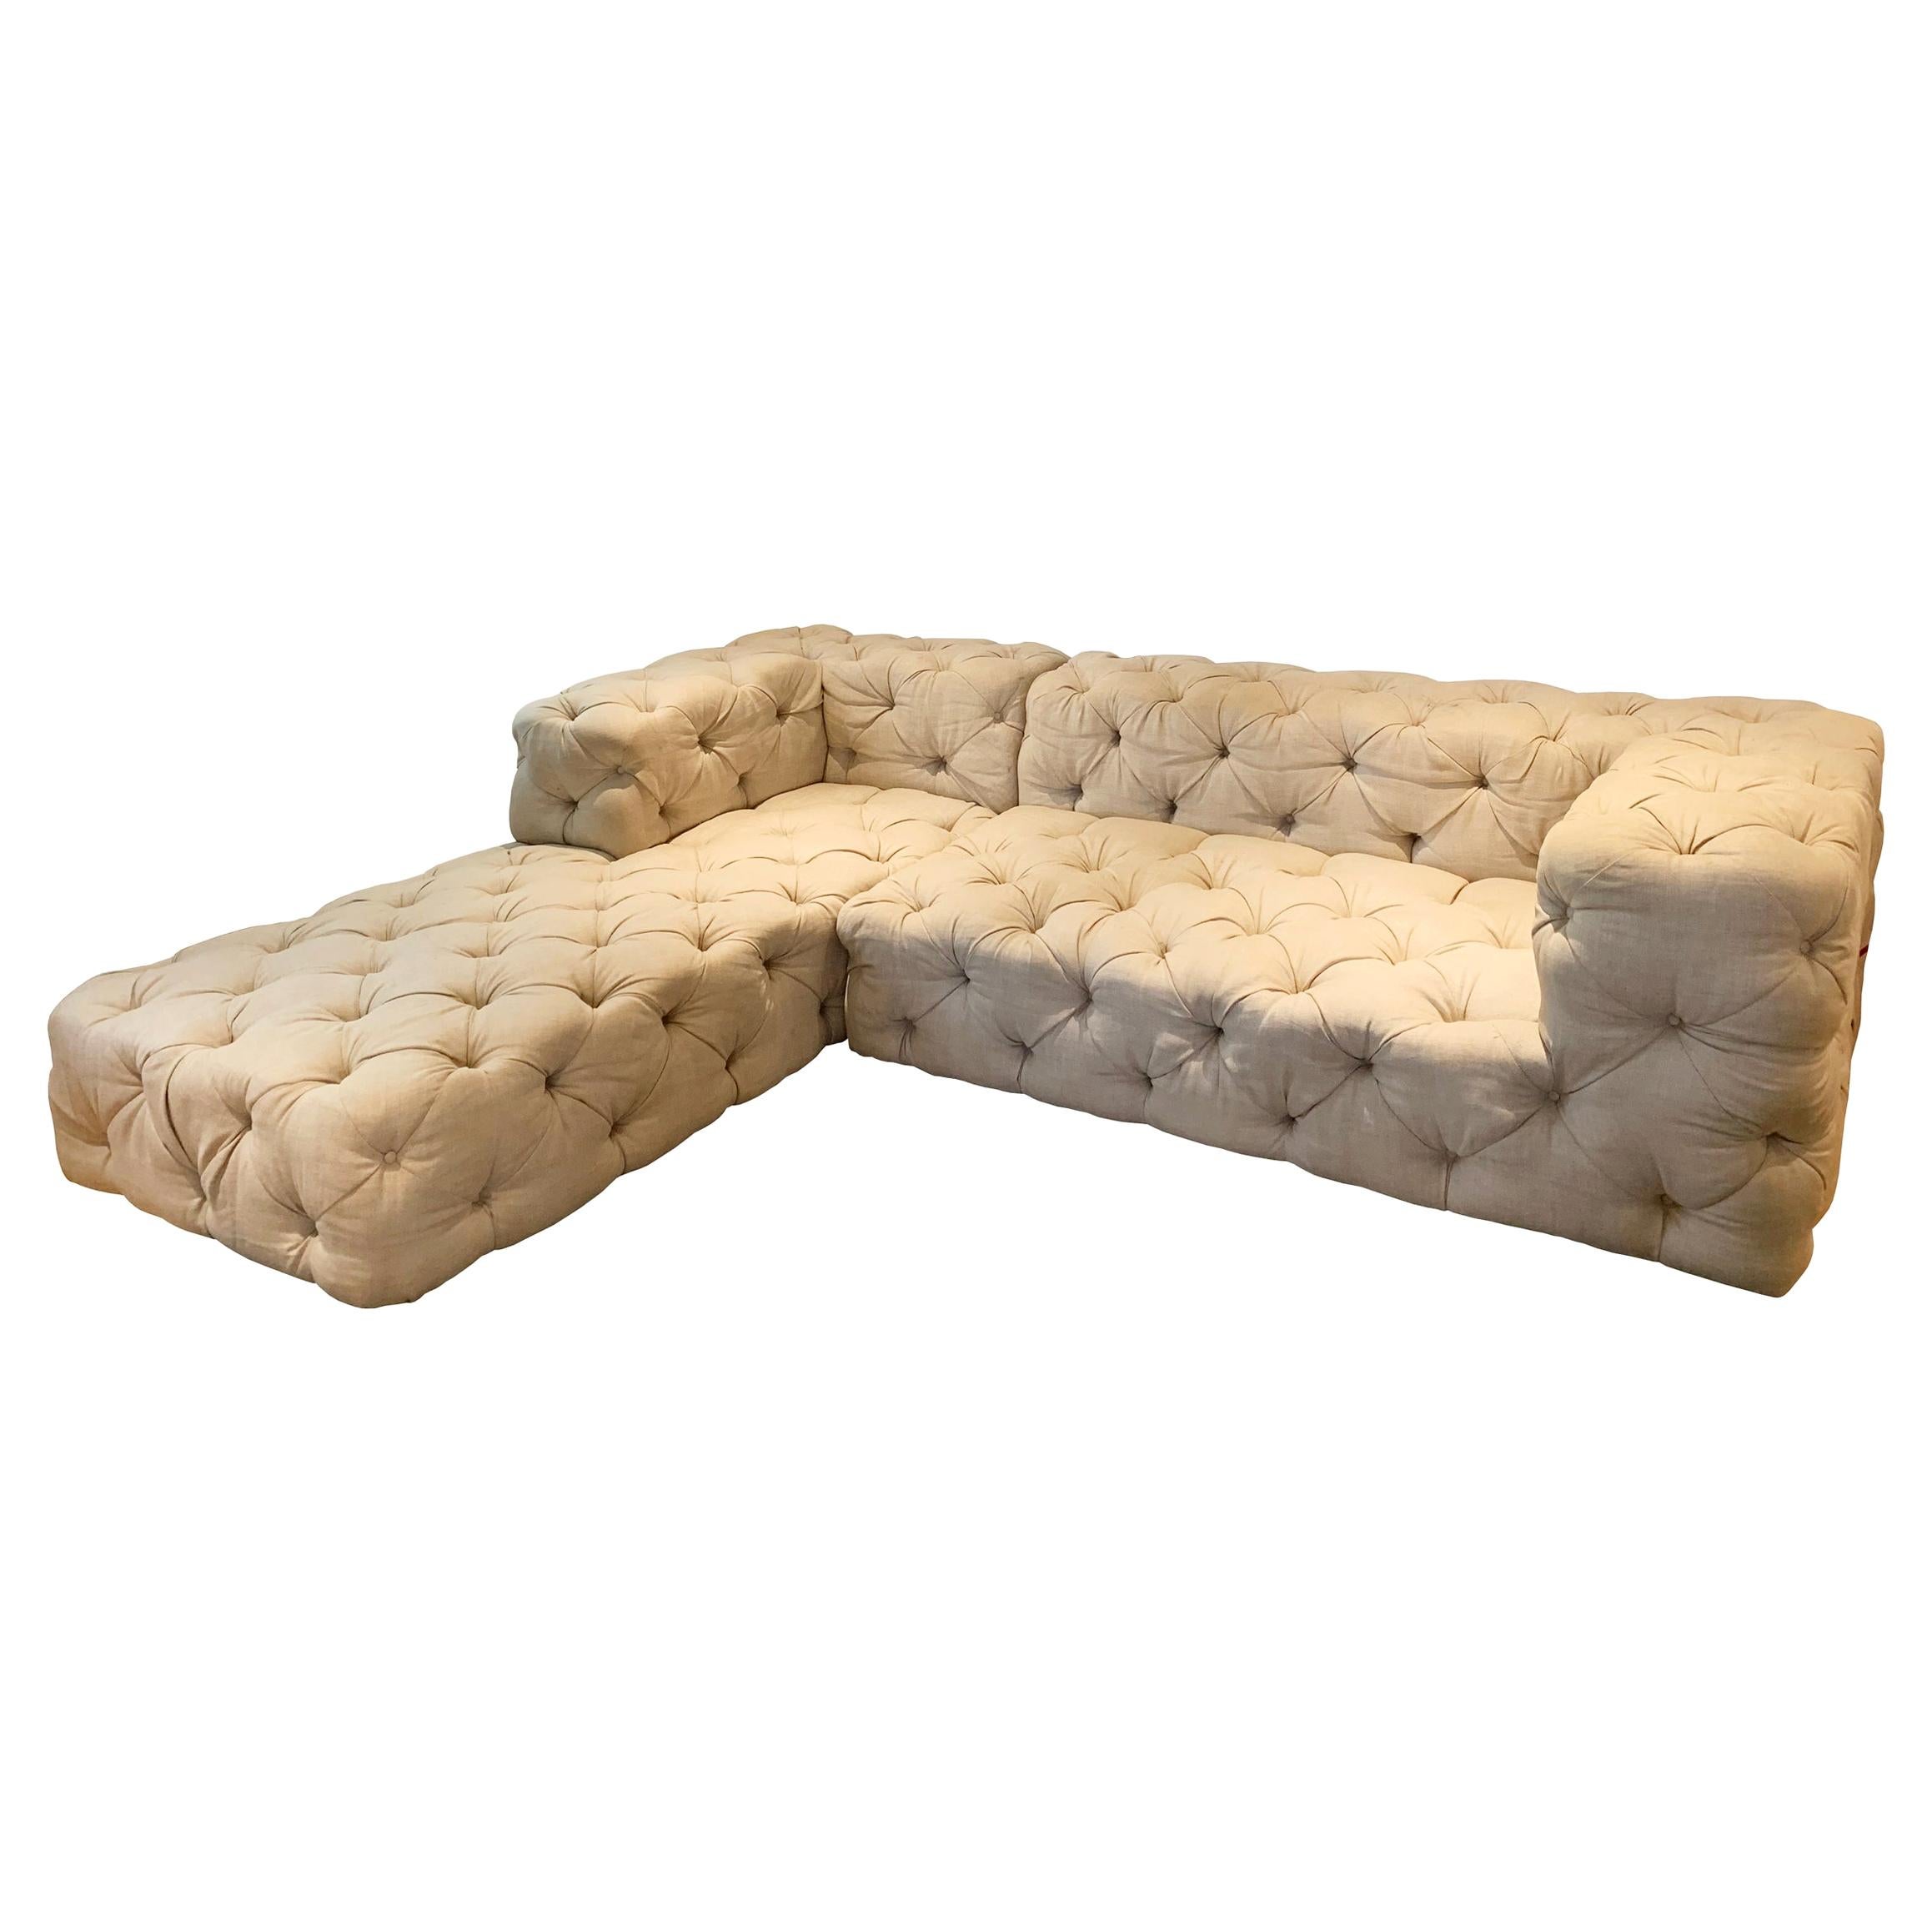 Deep Tufted 2 Piece Sectional Sofa Upholstered in Cream Colored Linen Fabric